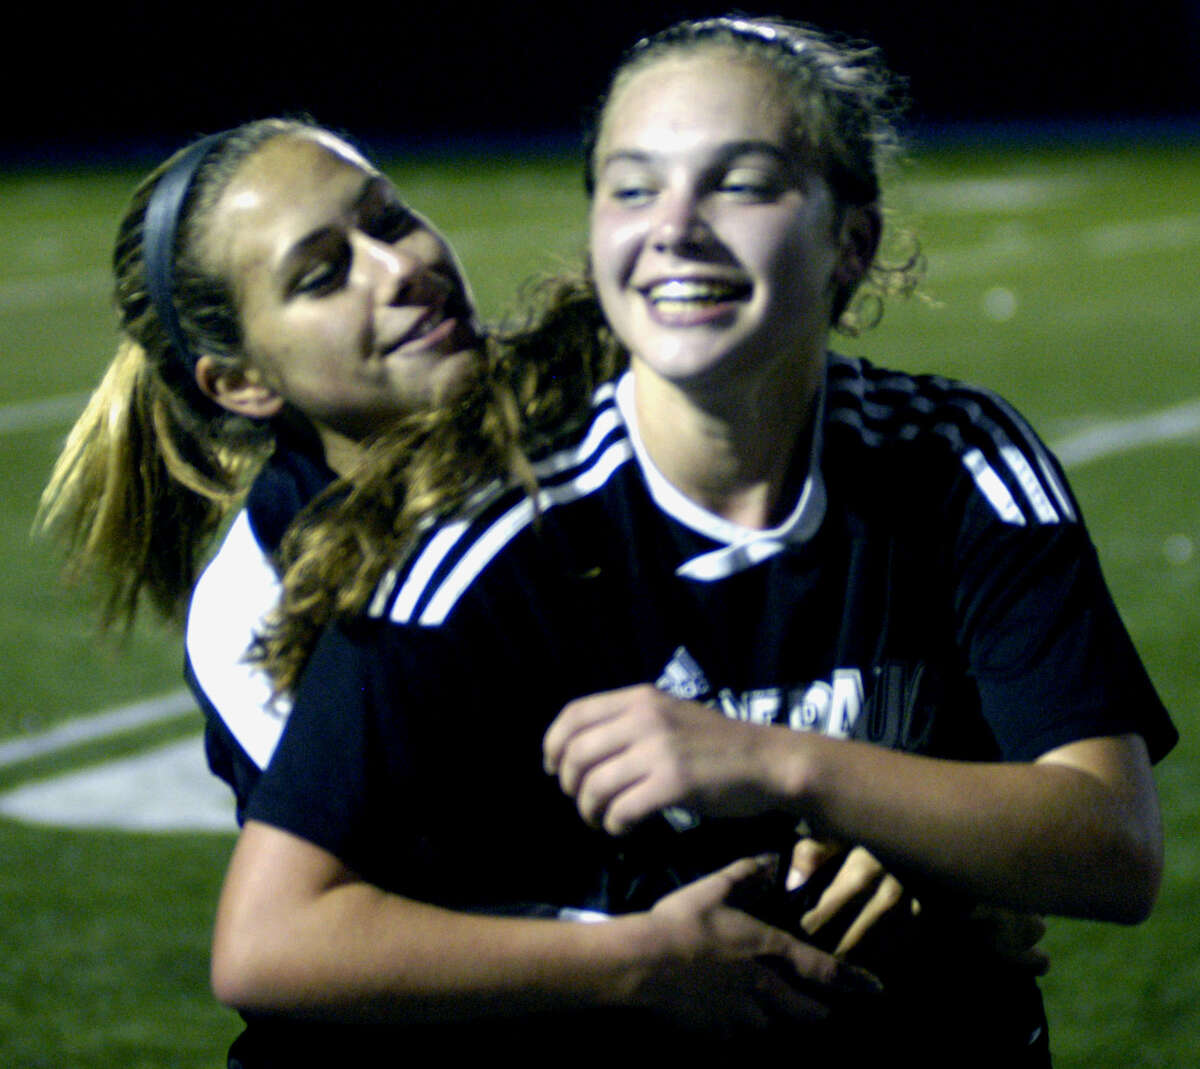 Panther sophomore Caly Farina, right, gets a conmgratulatory hug from a teammate after scoring the game-winning goal for Pomperaug in a 2-1 double-overtime victory over New Milford in the South-West Conference girls' soccer final at Newtown High. Nov. 1, 2013